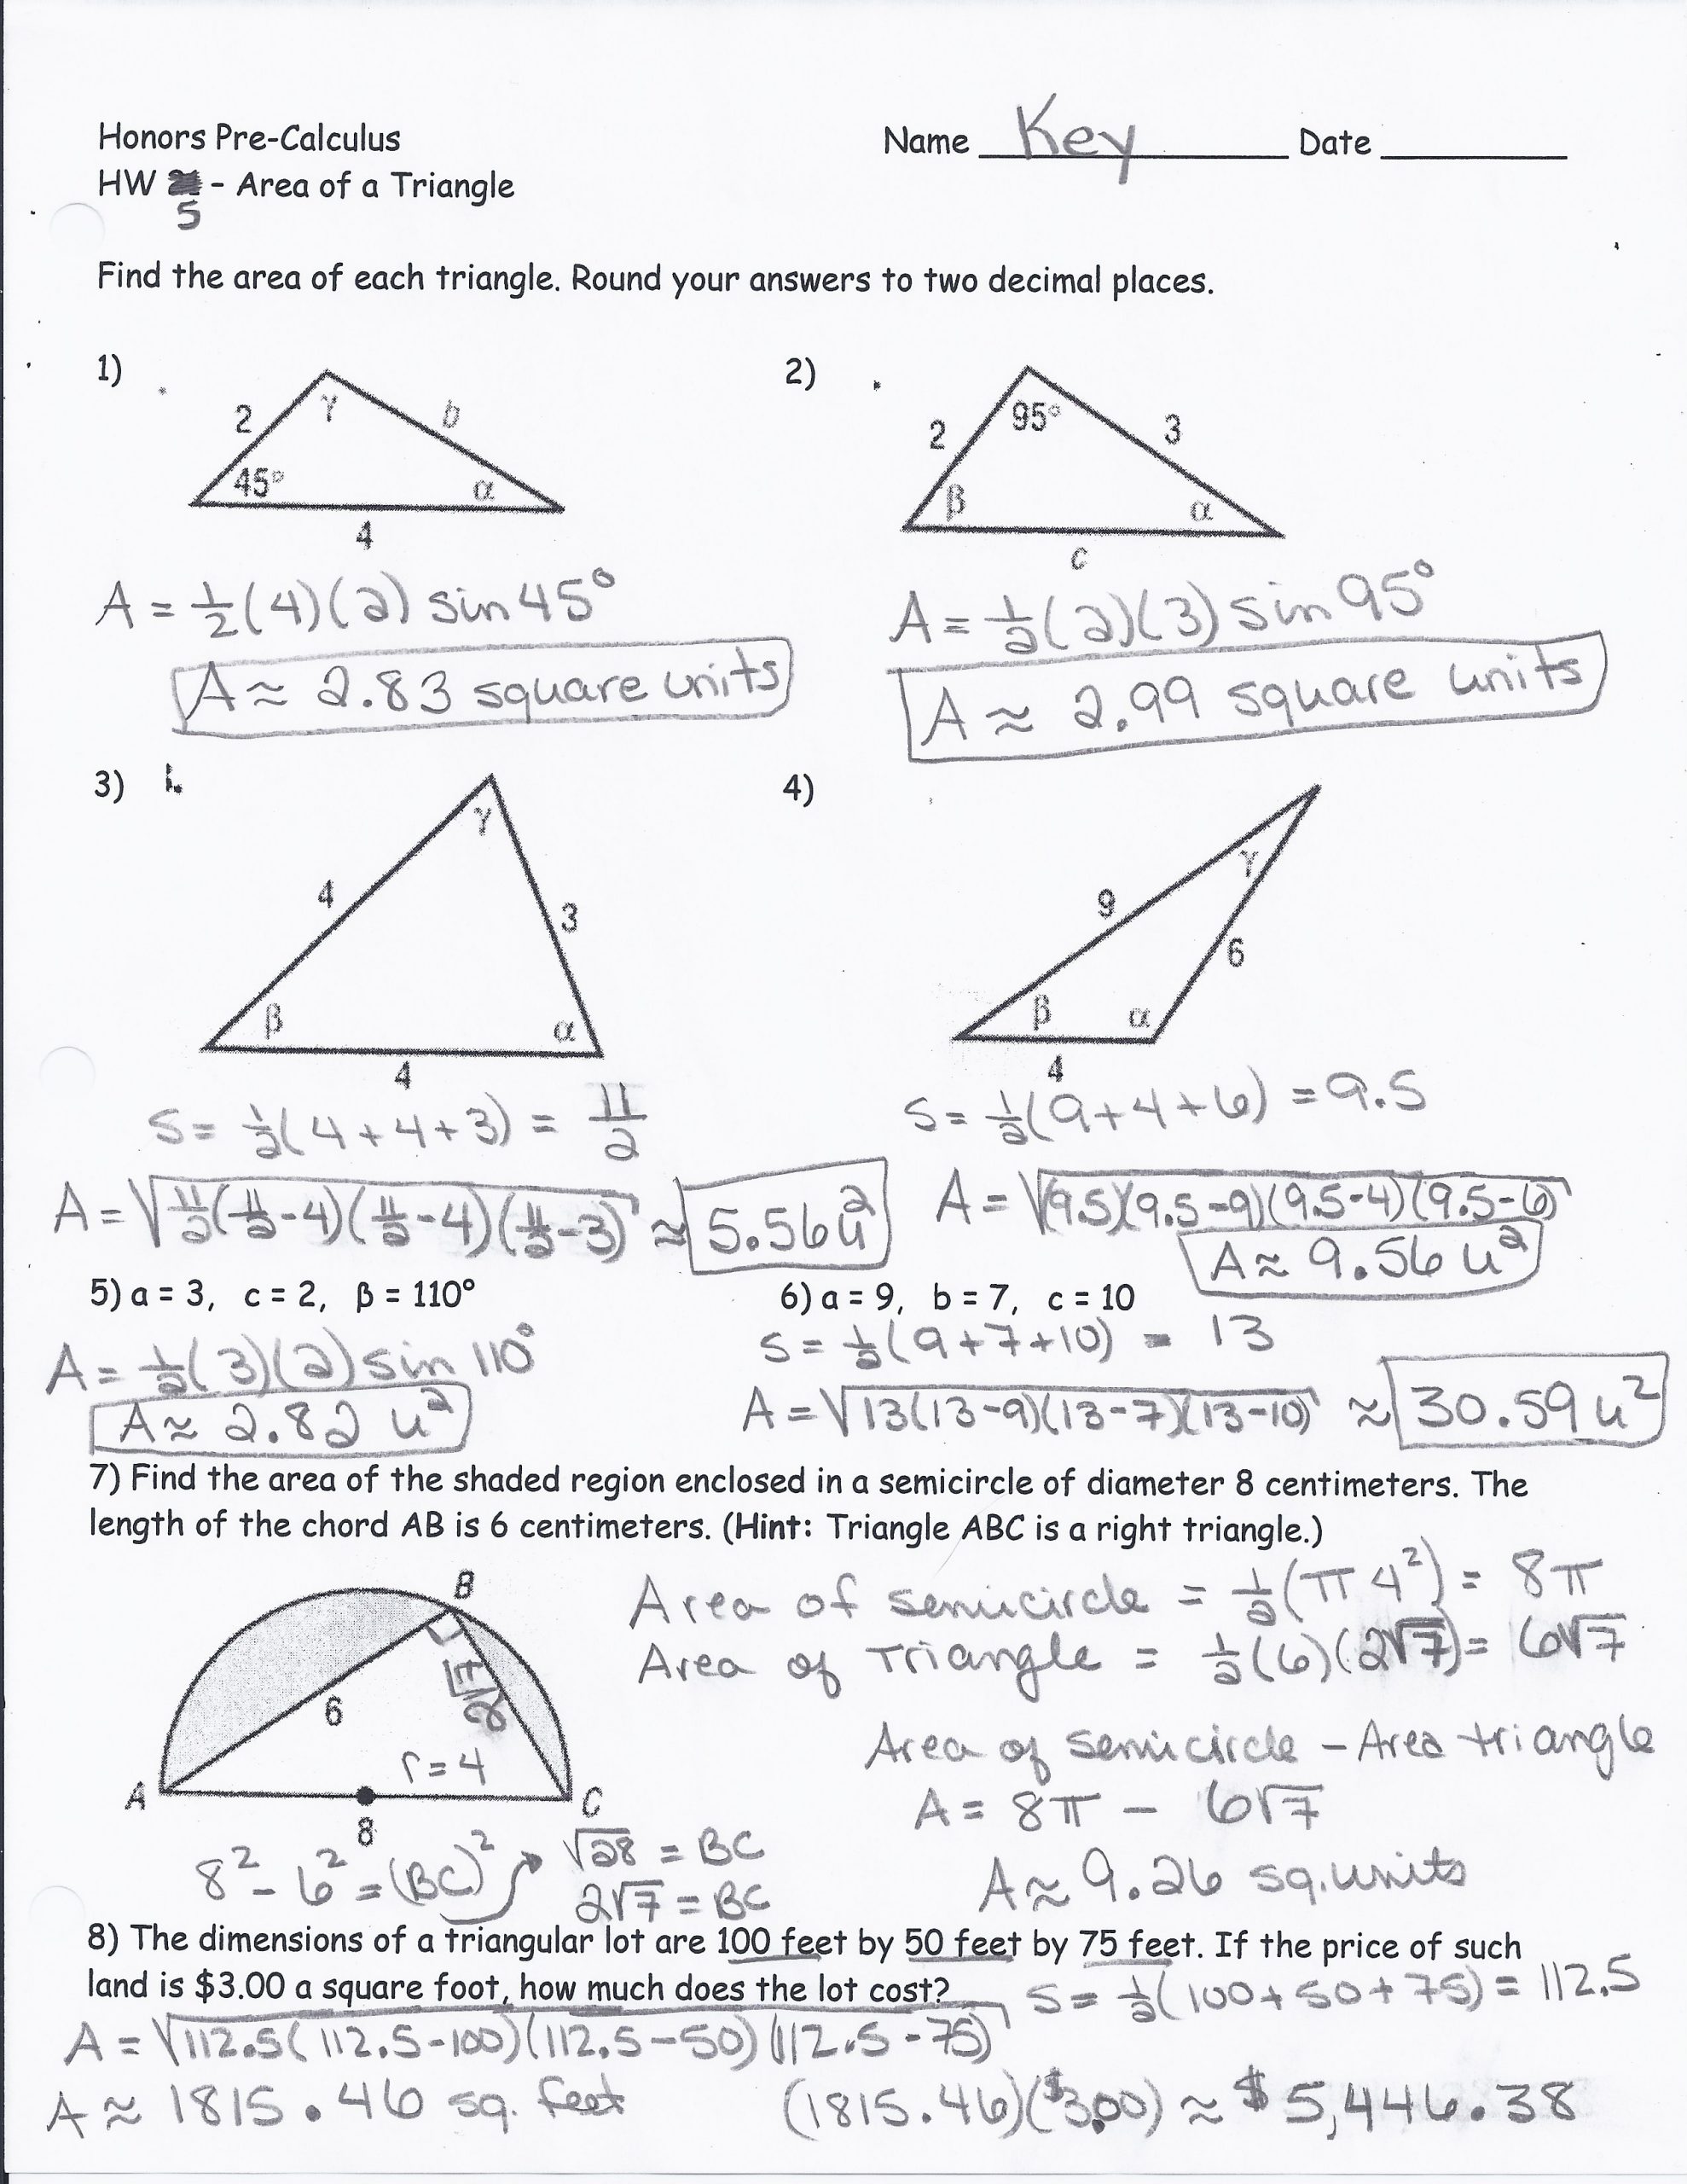 Soh Cah toa Worksheet Unit 3 Right Triangle Trig Law Of Sines and Cosines Mrs